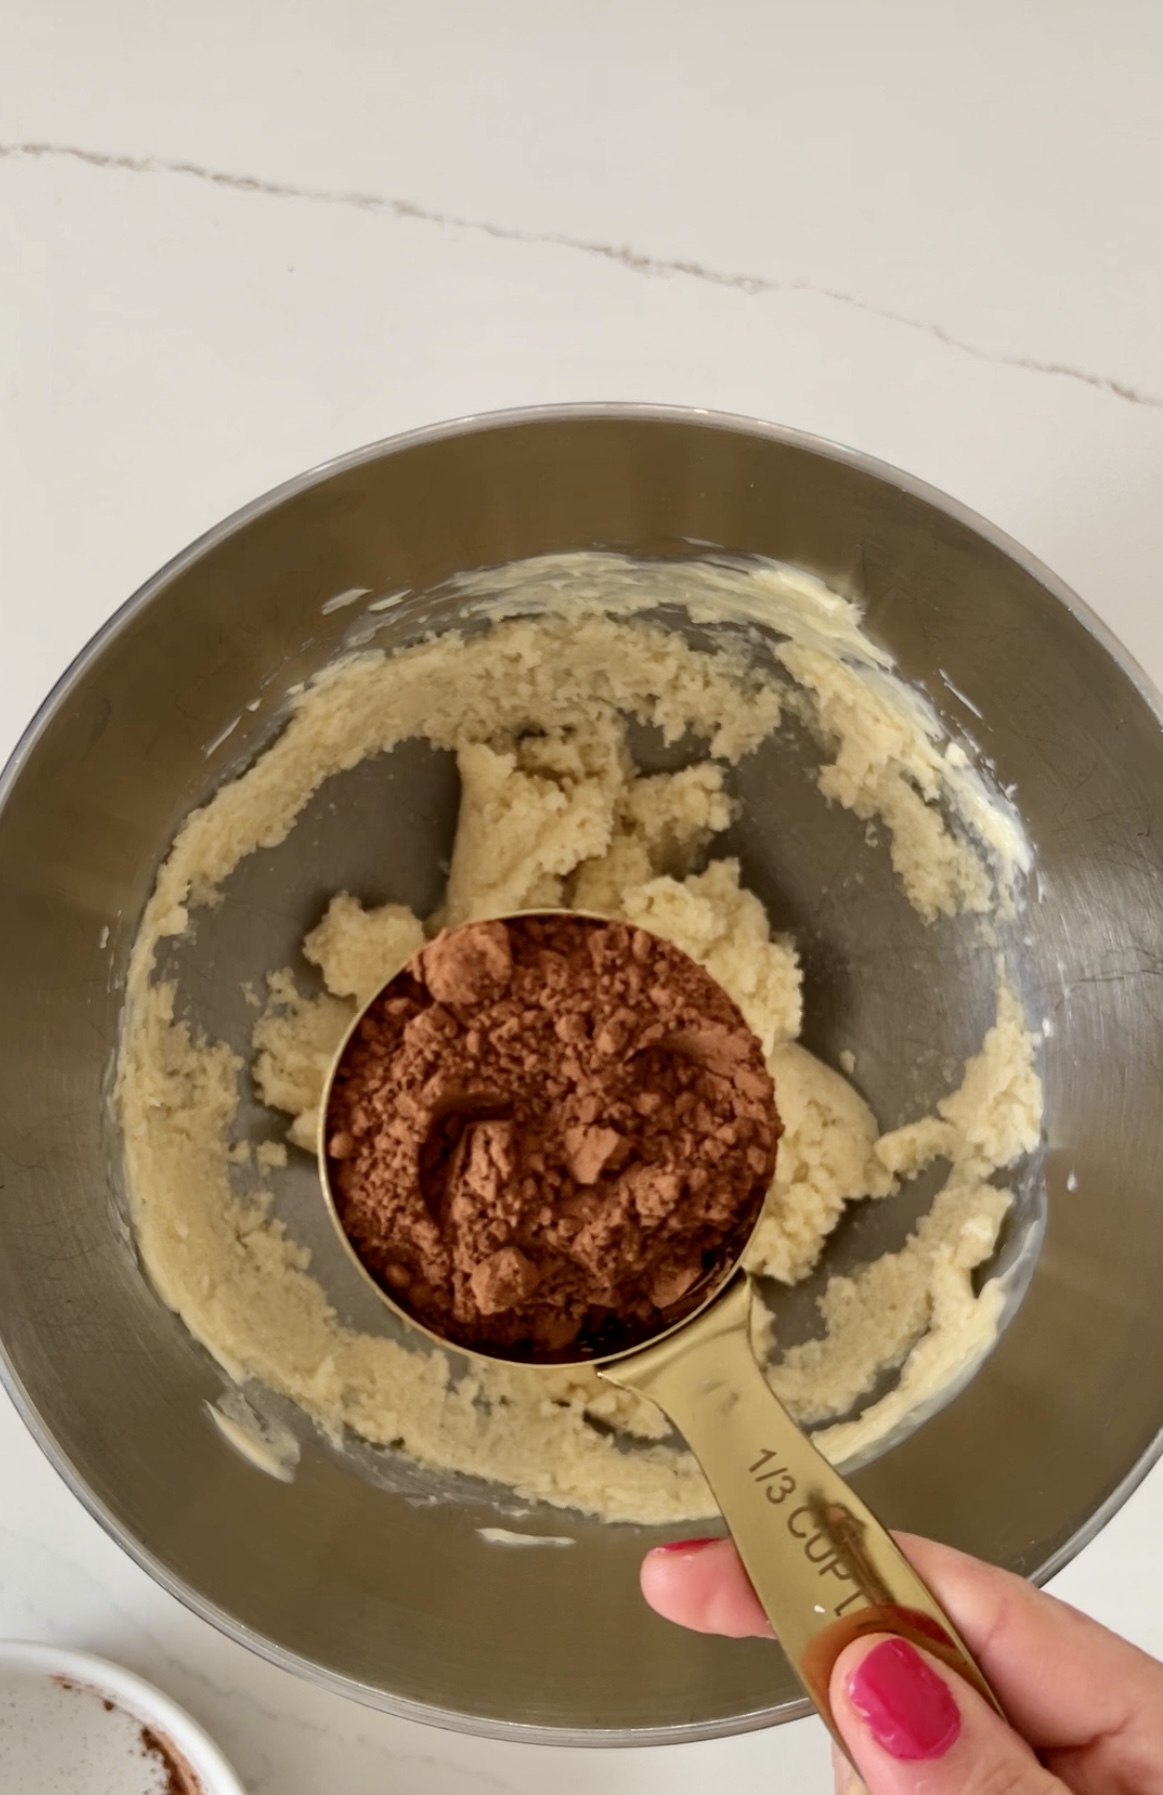 A vegan person is scooping double chocolate into a mixing bowl, preparing it for cookies.